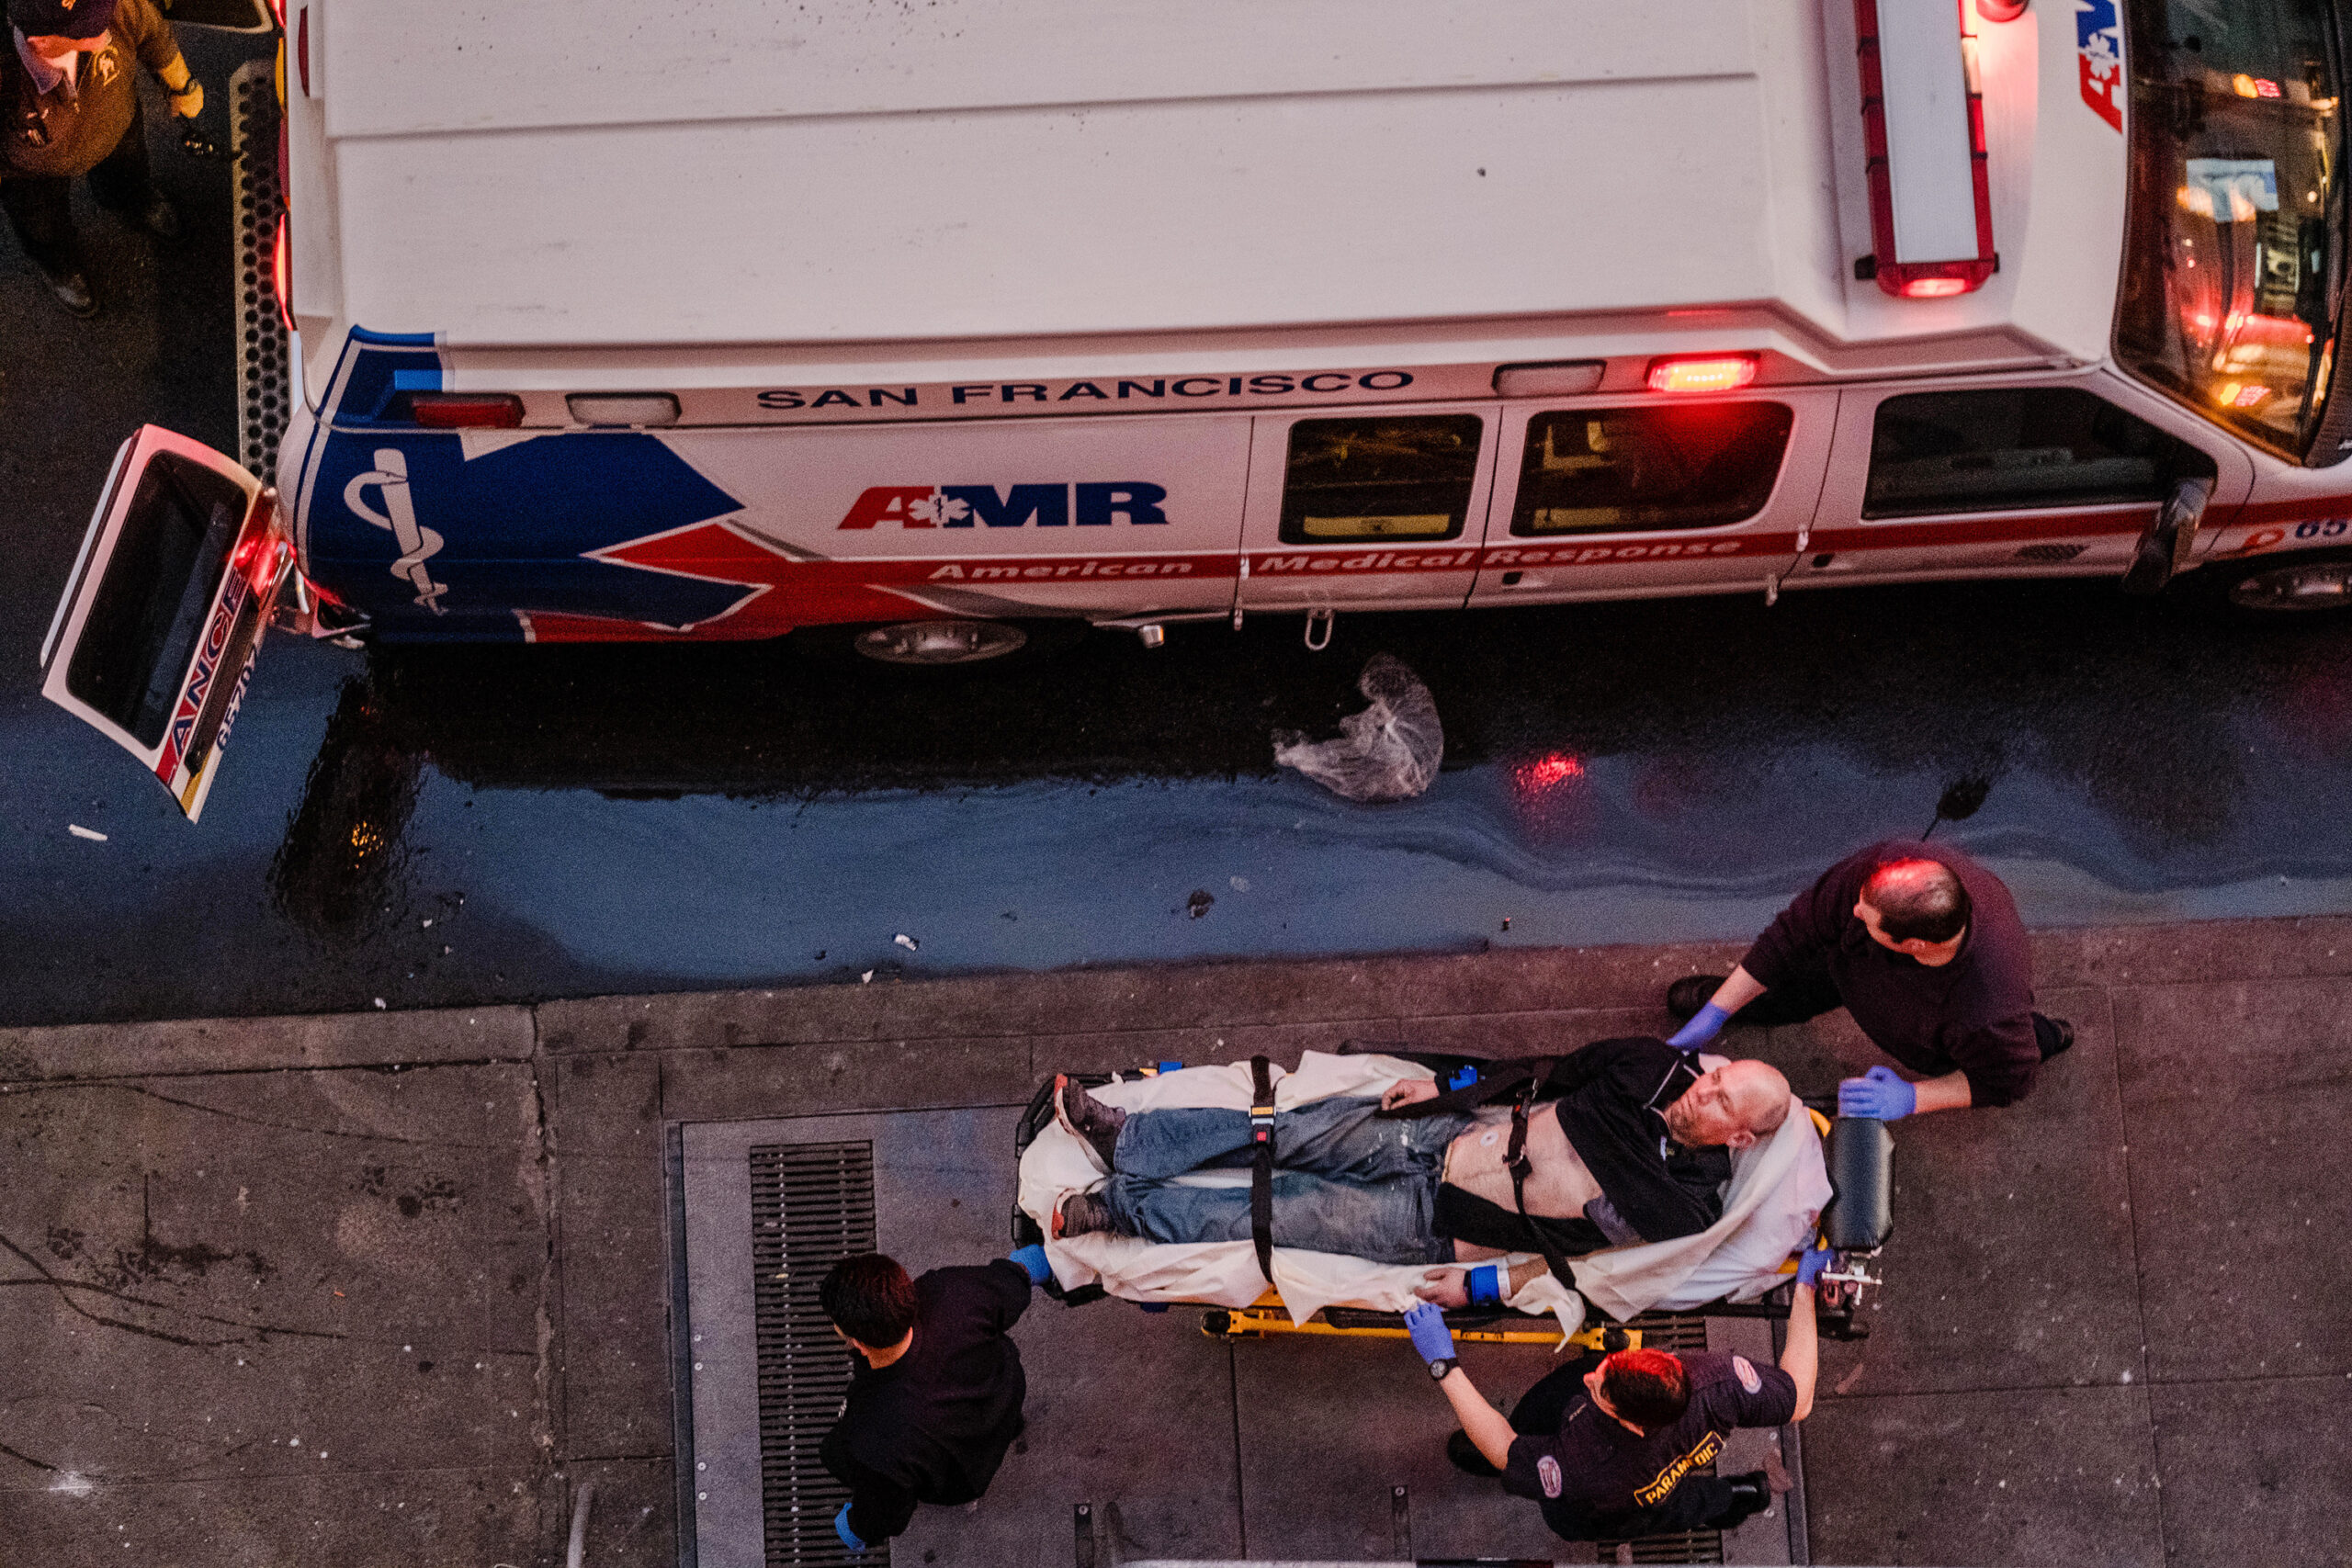 Paramedics attend to a person on a stretcher beside an ambulance on a city street at dusk.